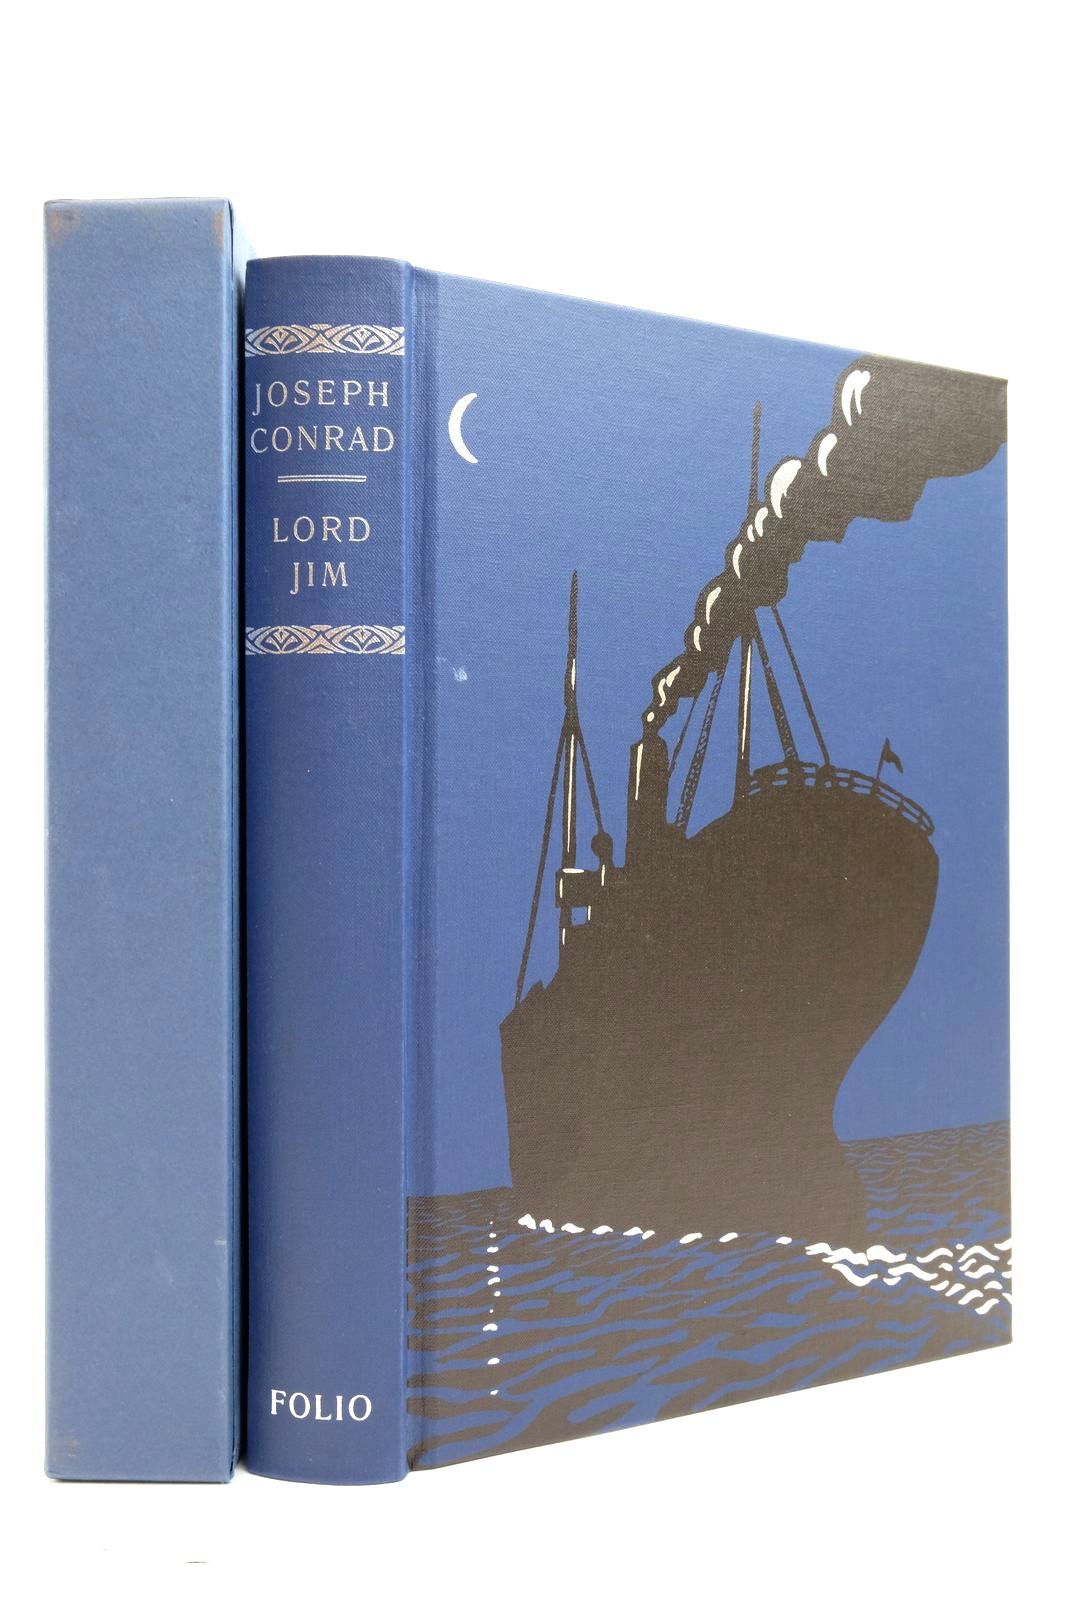 Photo of LORD JIM: A TALE written by Conrad, Joseph Young, Gavin illustrated by Mosley, Francis published by Folio Society (STOCK CODE: 2137259)  for sale by Stella & Rose's Books